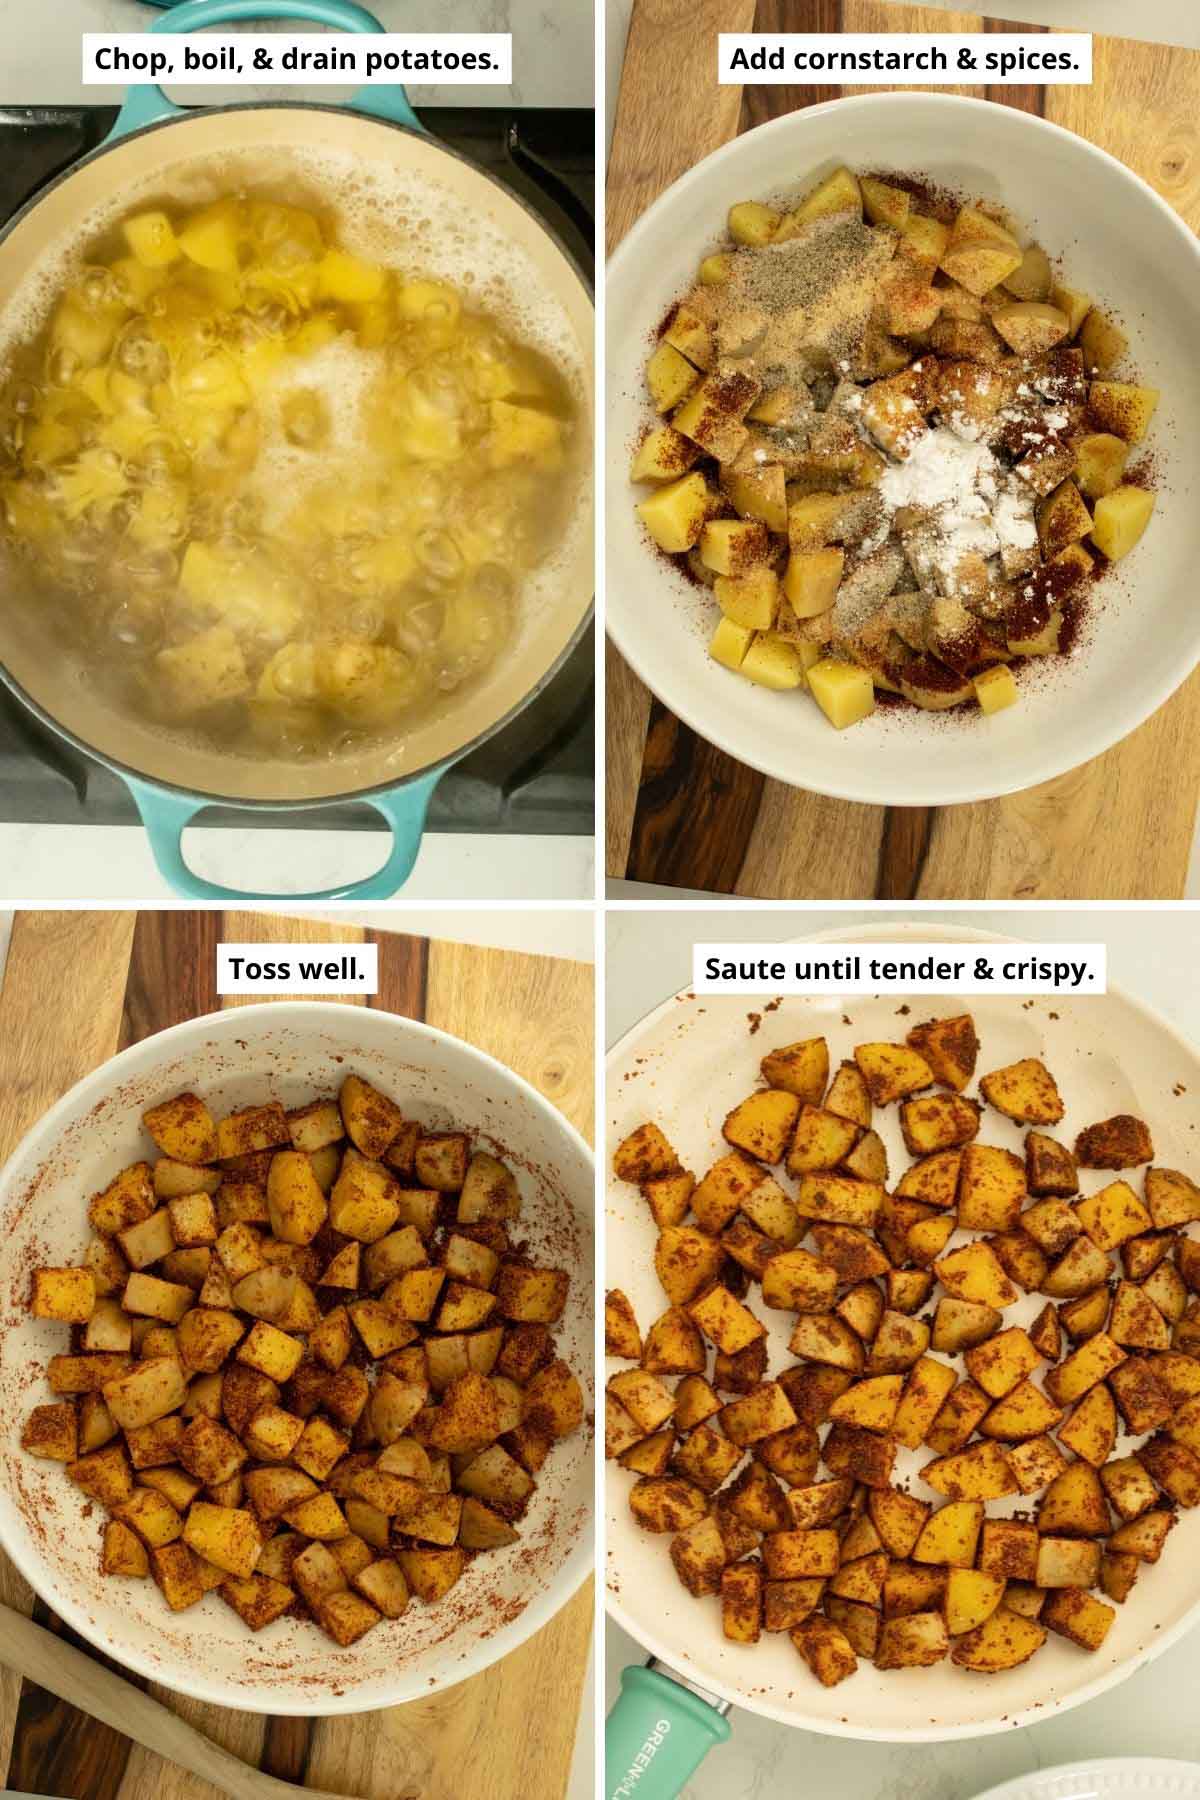 image collage showing the potatoes boiling in a pot, then in a bowl with the spices before and after mixing, and in the frying pan after sautéing